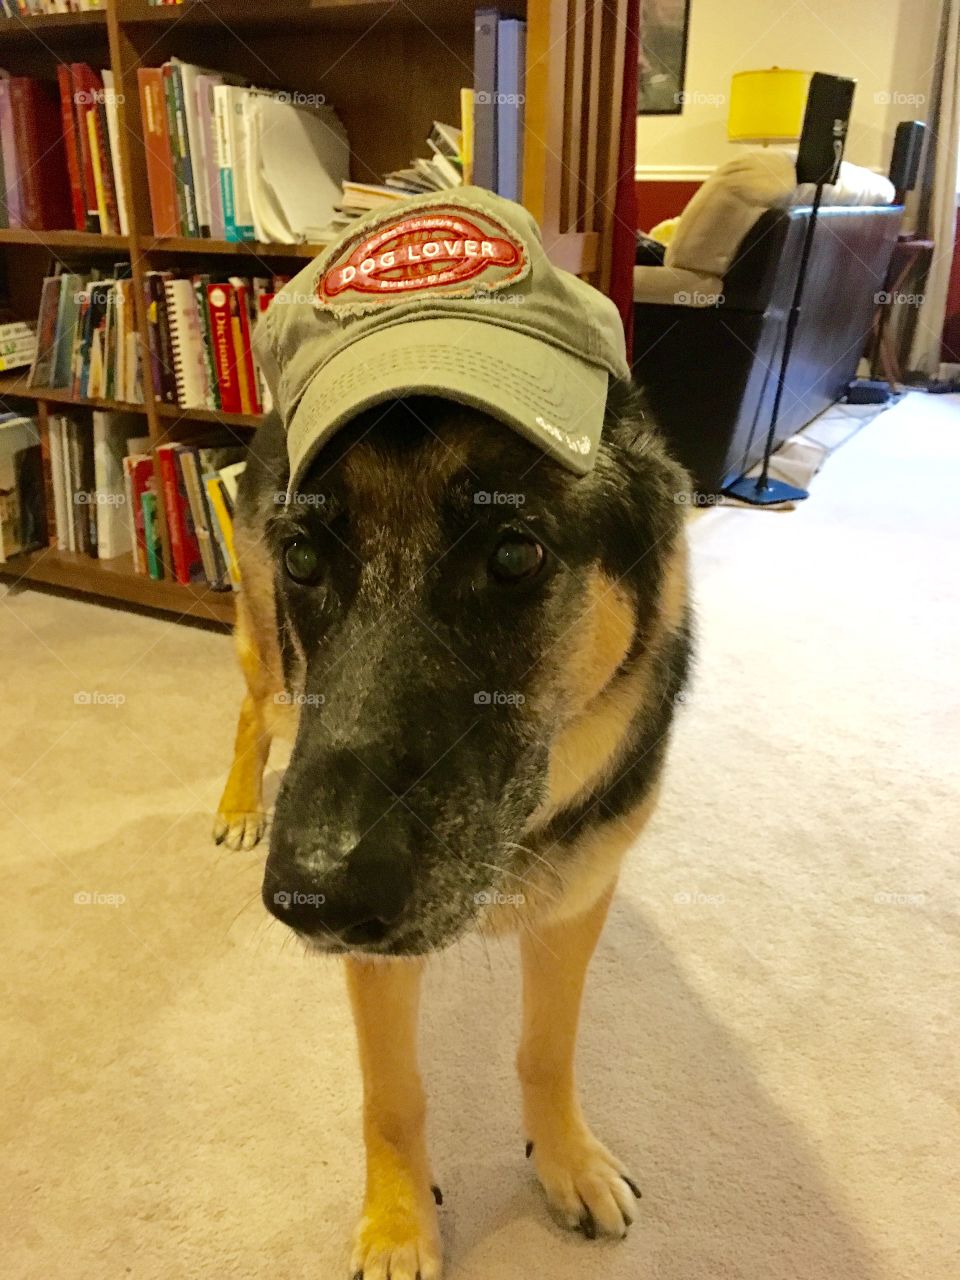 Trooper supporting Dogs